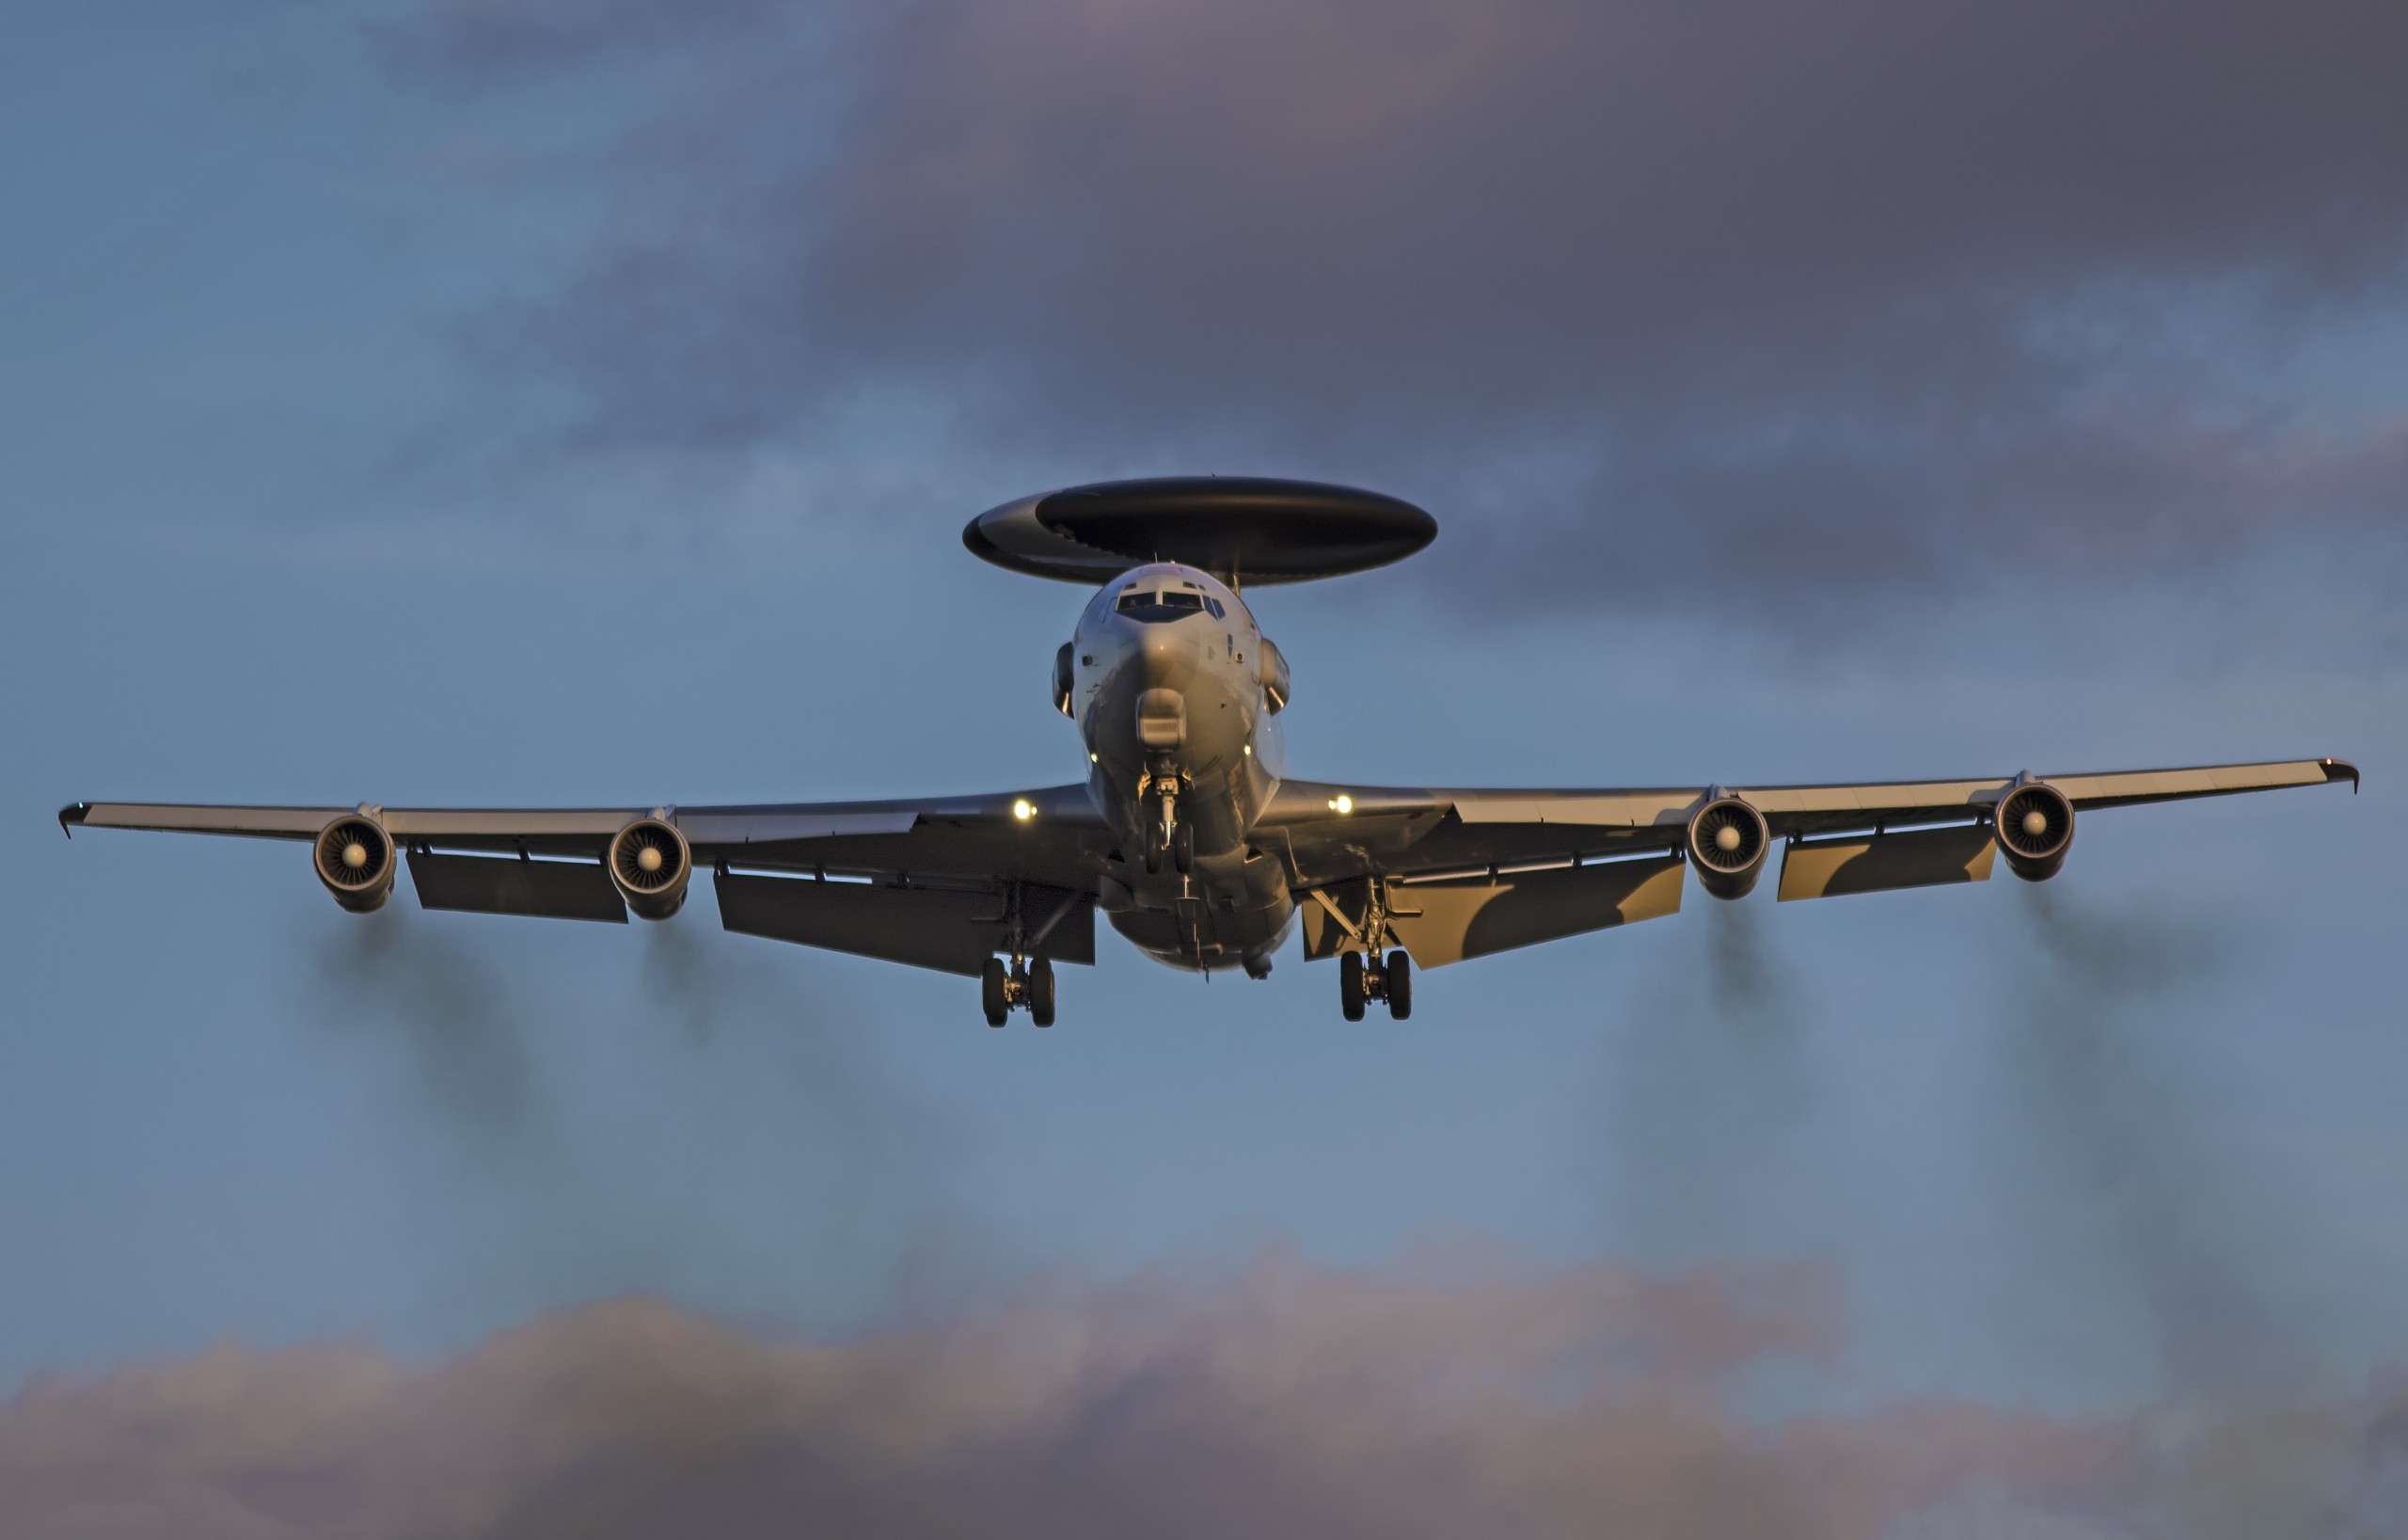 General 2560x1637 military aircraft vehicle aircraft military Boeing Boeing E-3 Sentry US Air Force take-off Boeing 747 transport American aircraft